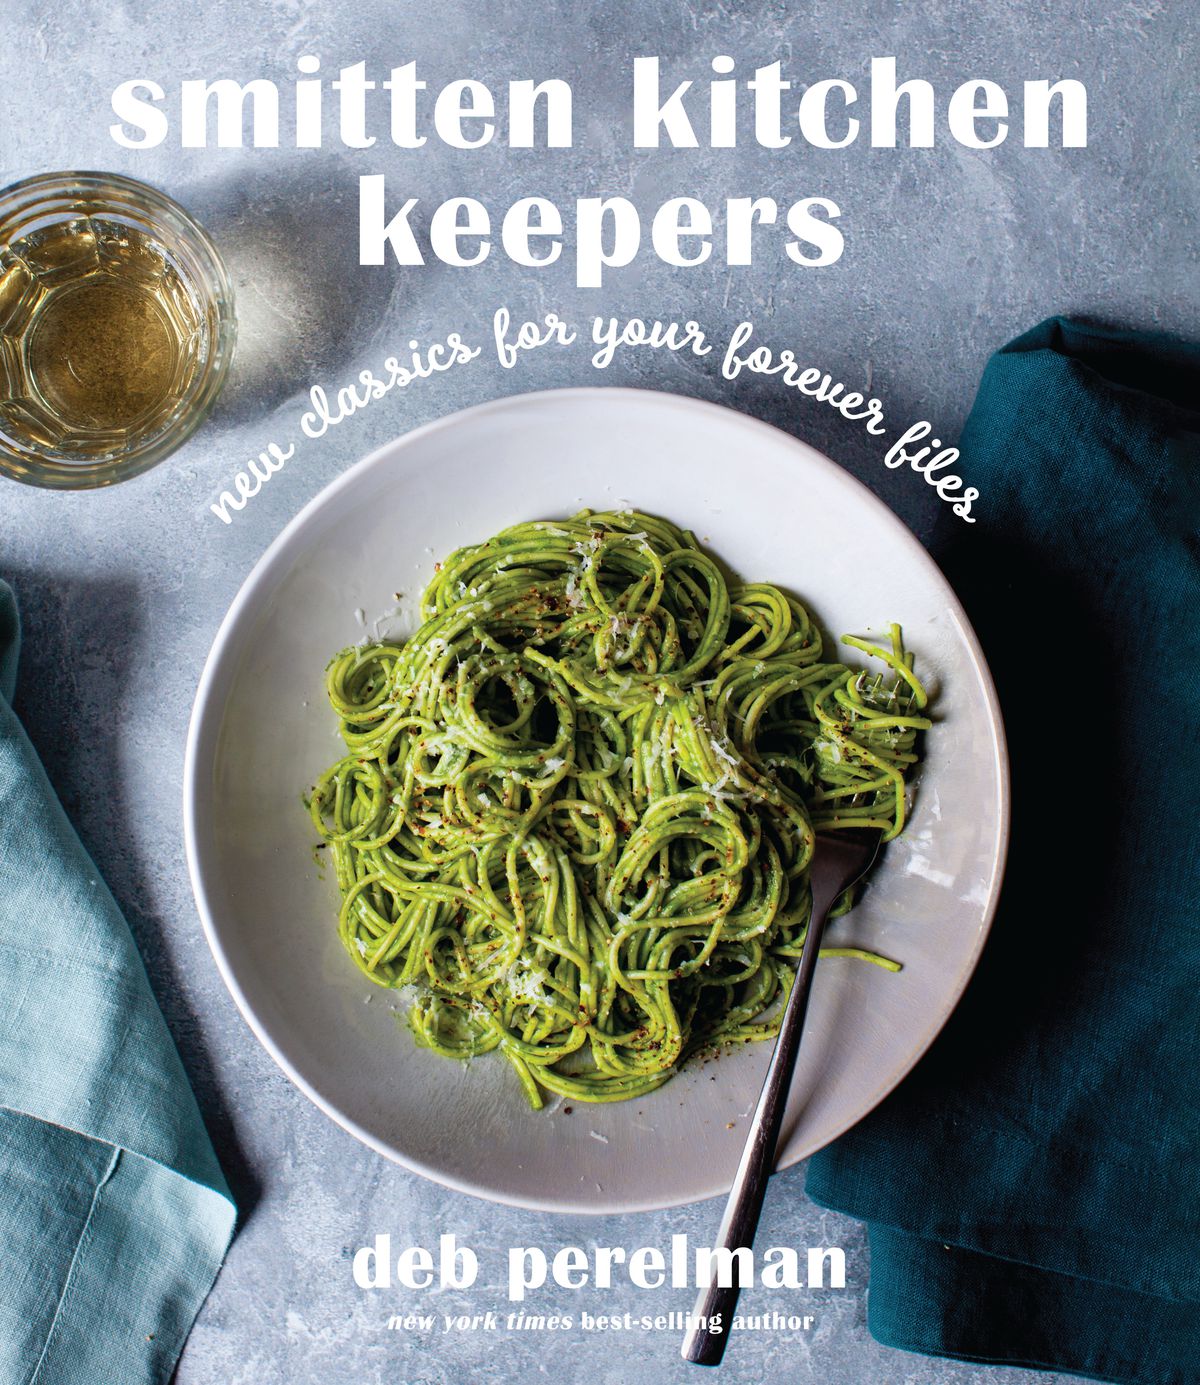 The cover of Smitten Kitchen Keepers featuring a bowl of green pasta